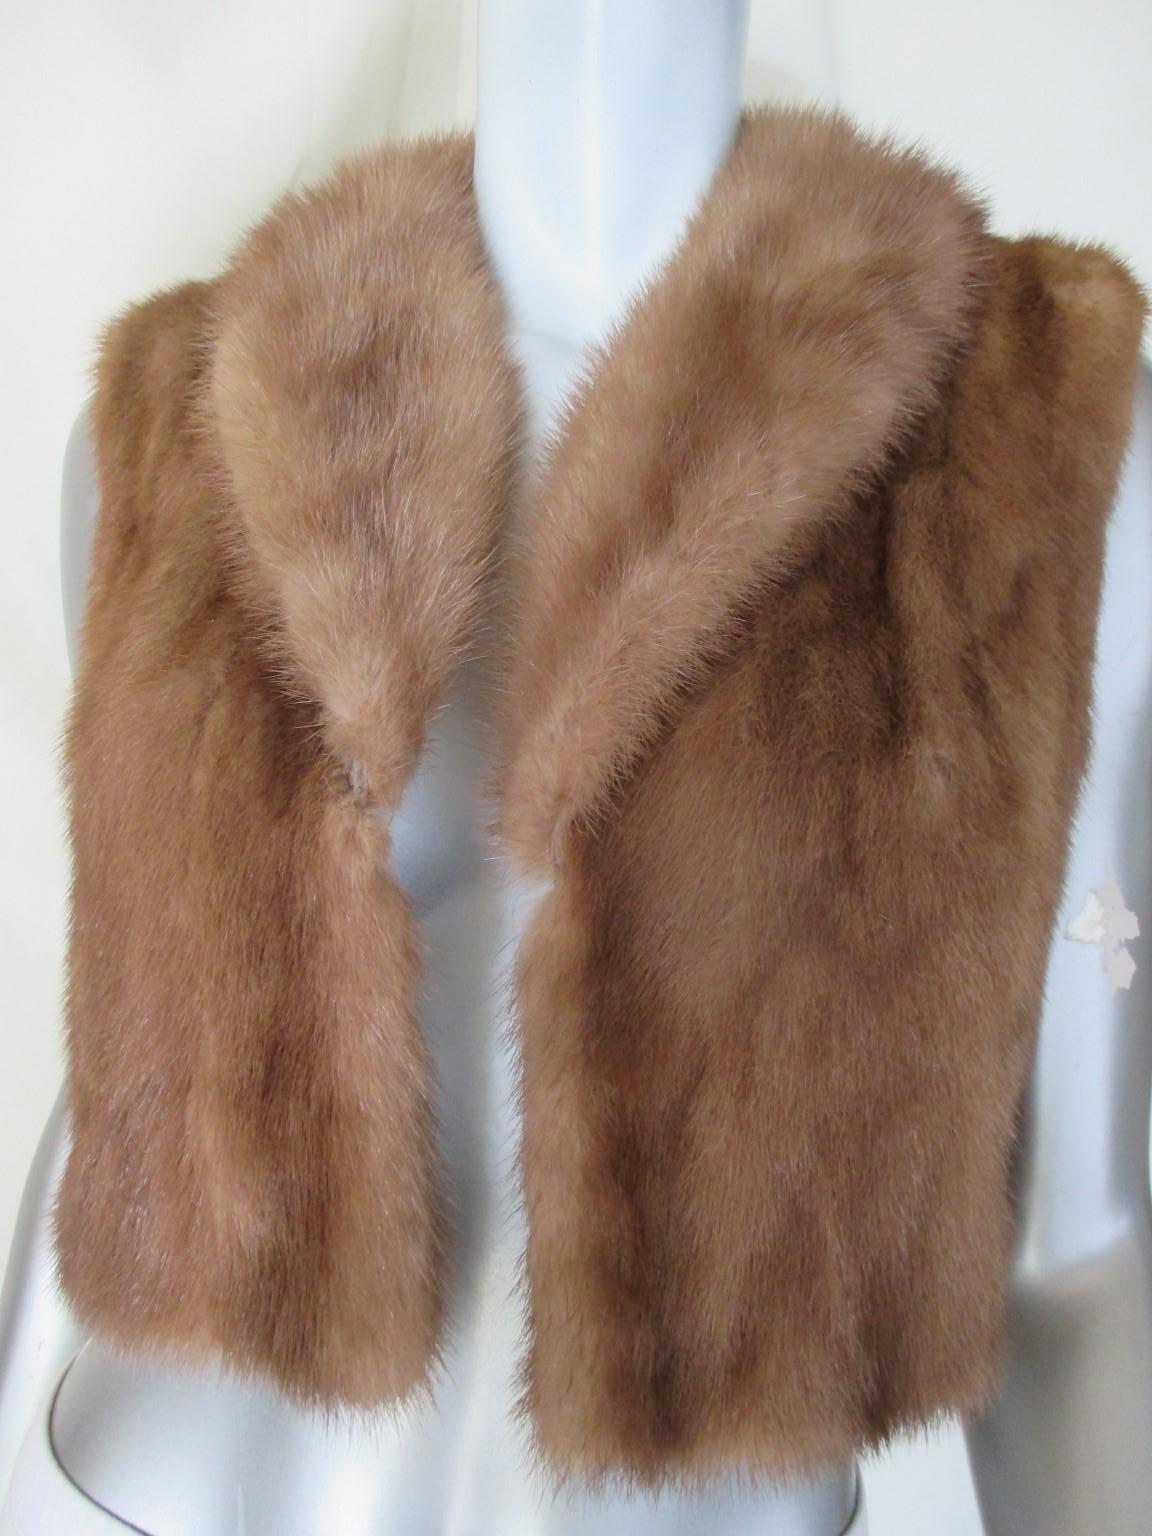 This vintage mink fur jacket is made of brown mink with leather side panels and can be worn sleeveless or with the knitted sleeves with closing buttons.
It has no pockets and 1 closing hook
From Scarbroughs, Austin, designer collection
in good